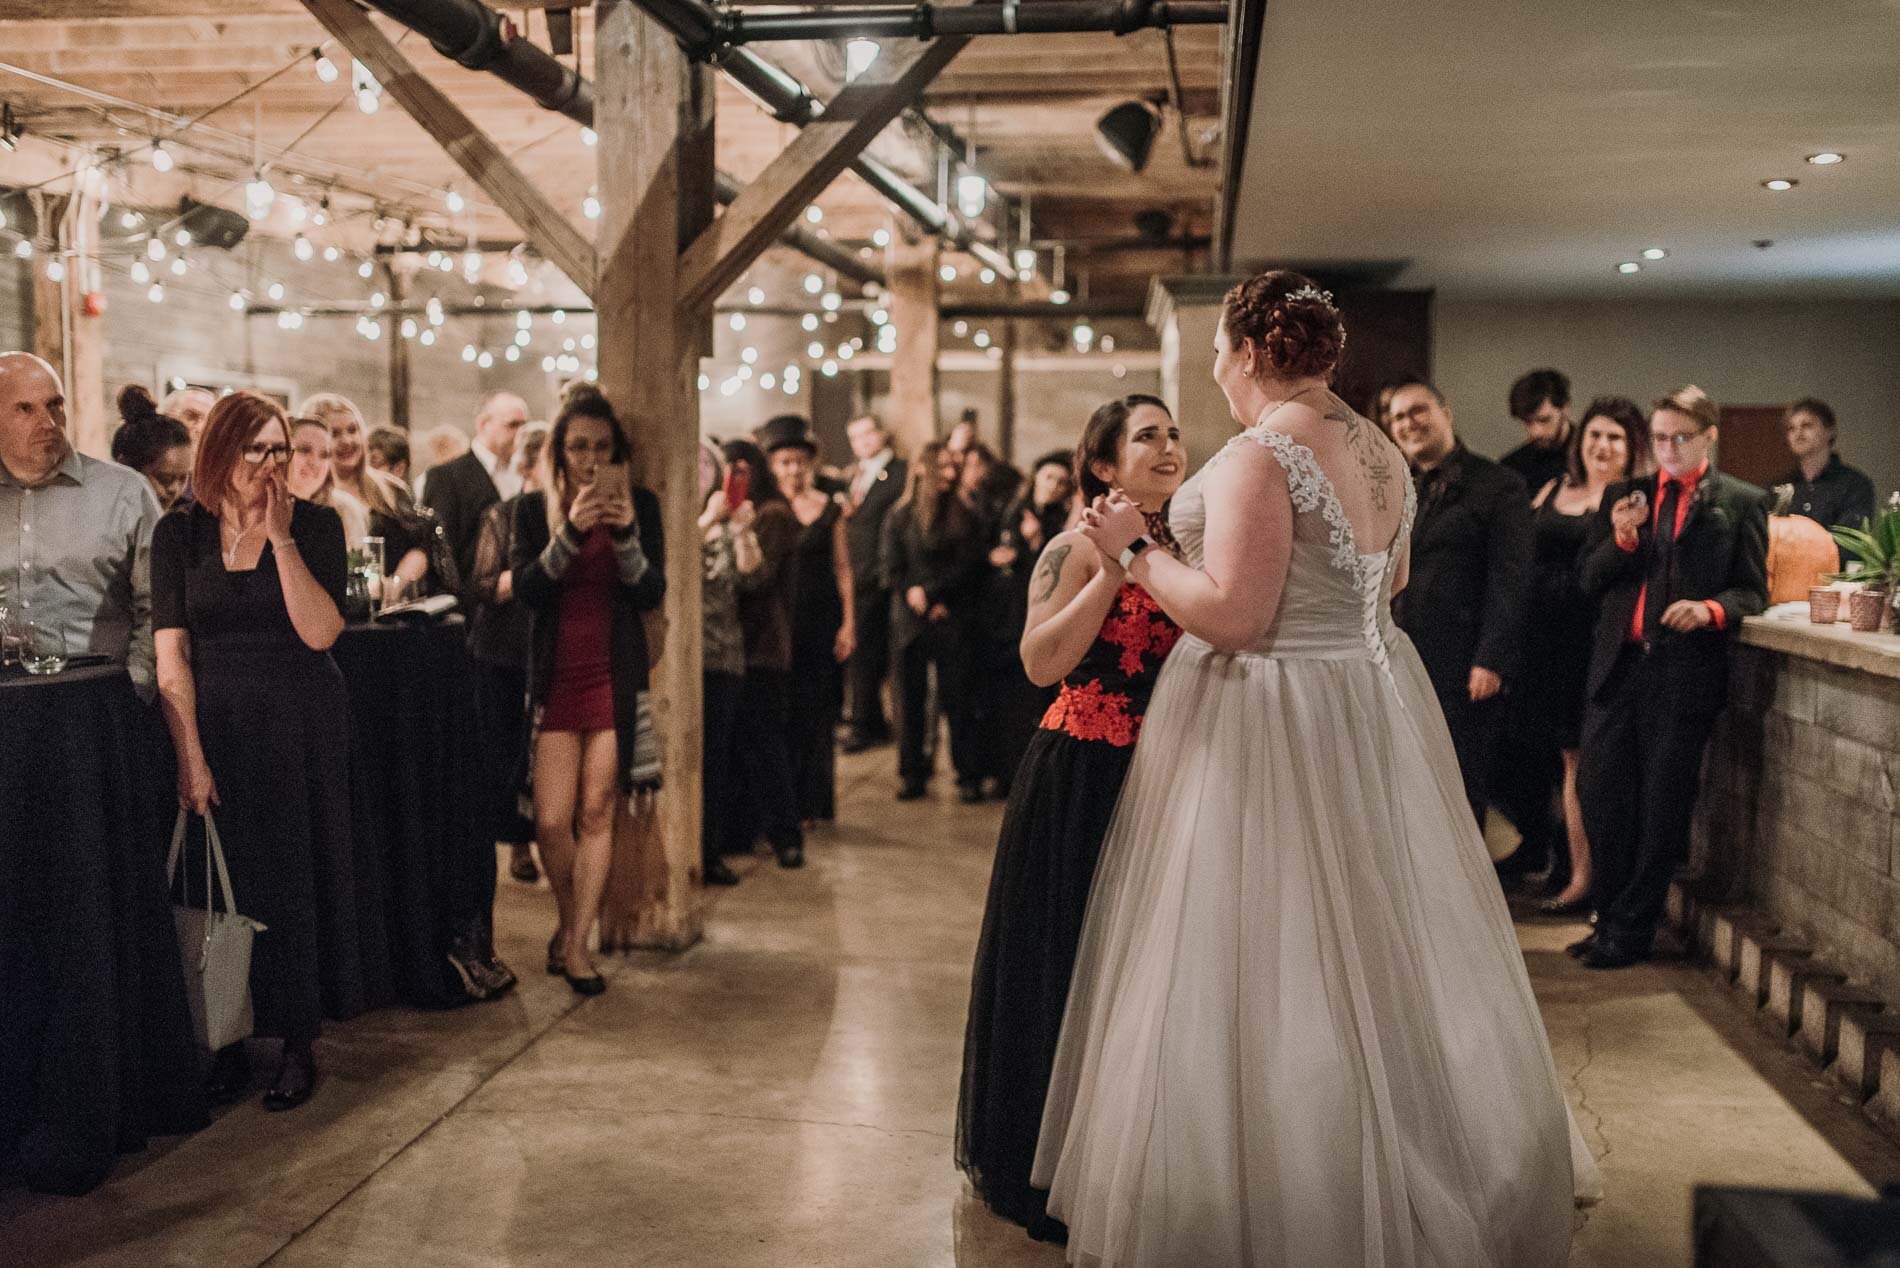 First dance of two brides at the loft in the Distillery, Toronto